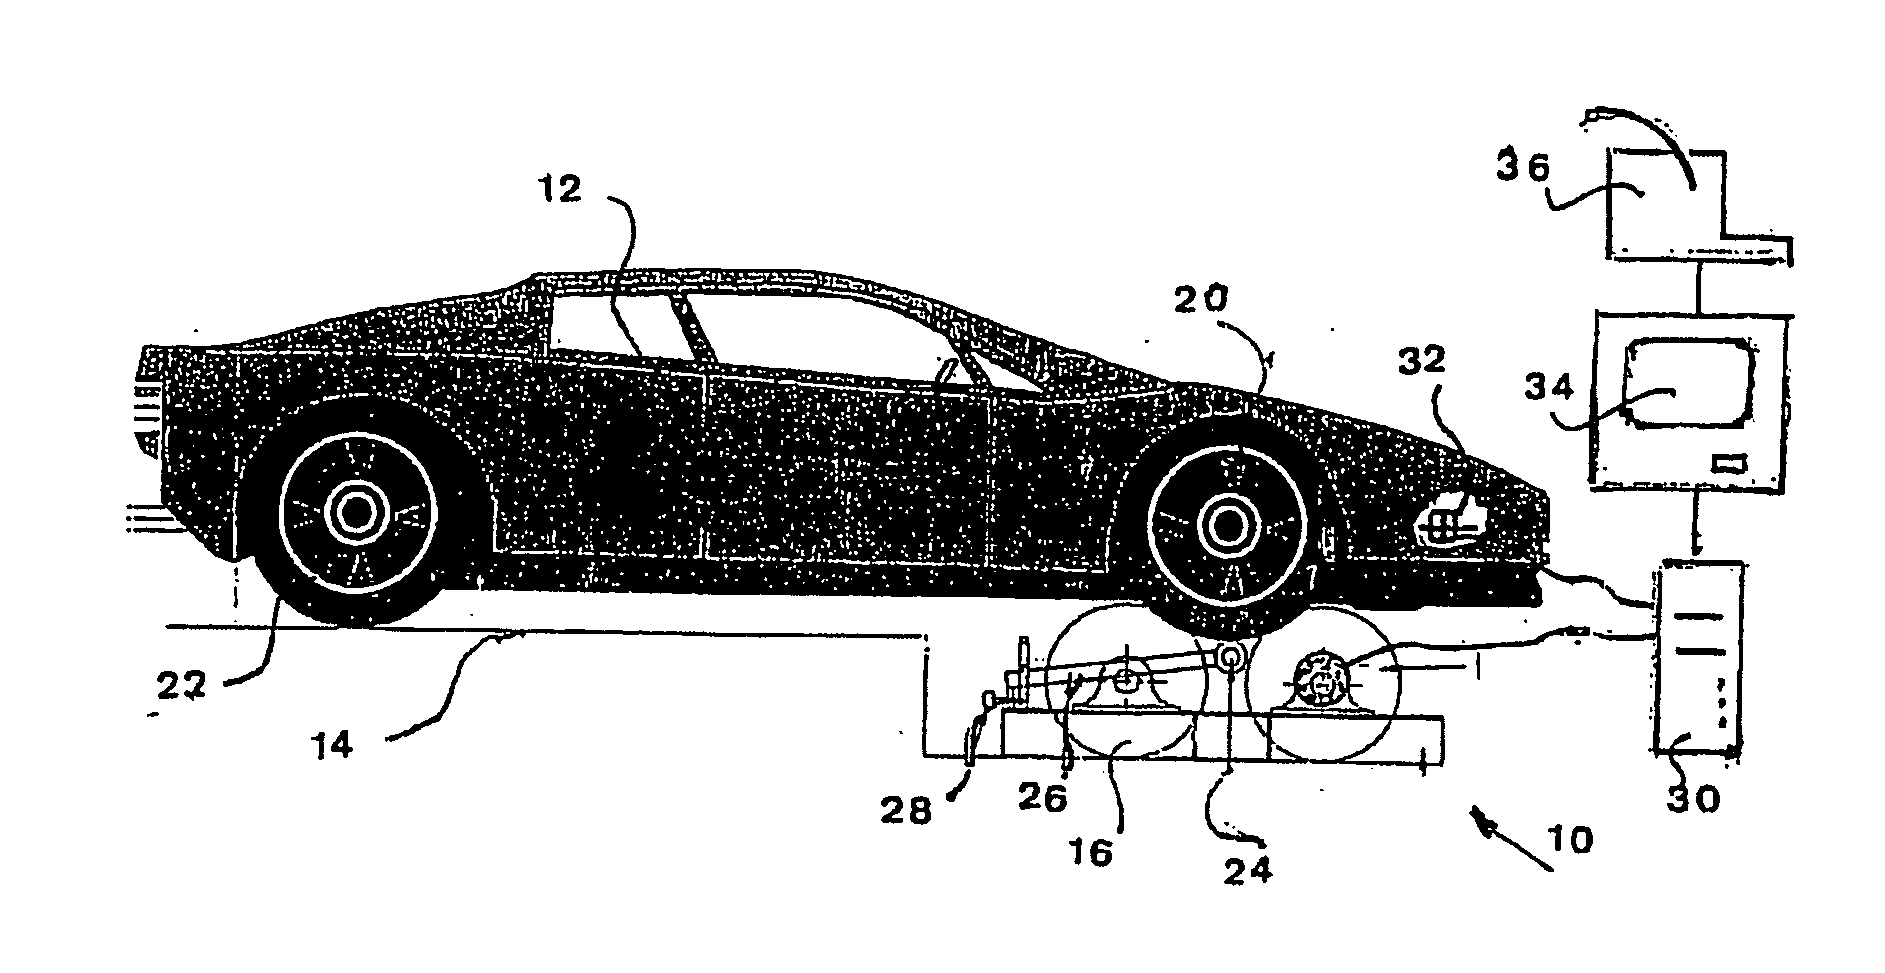 Apparatus and method for testing the performance of a vehicle